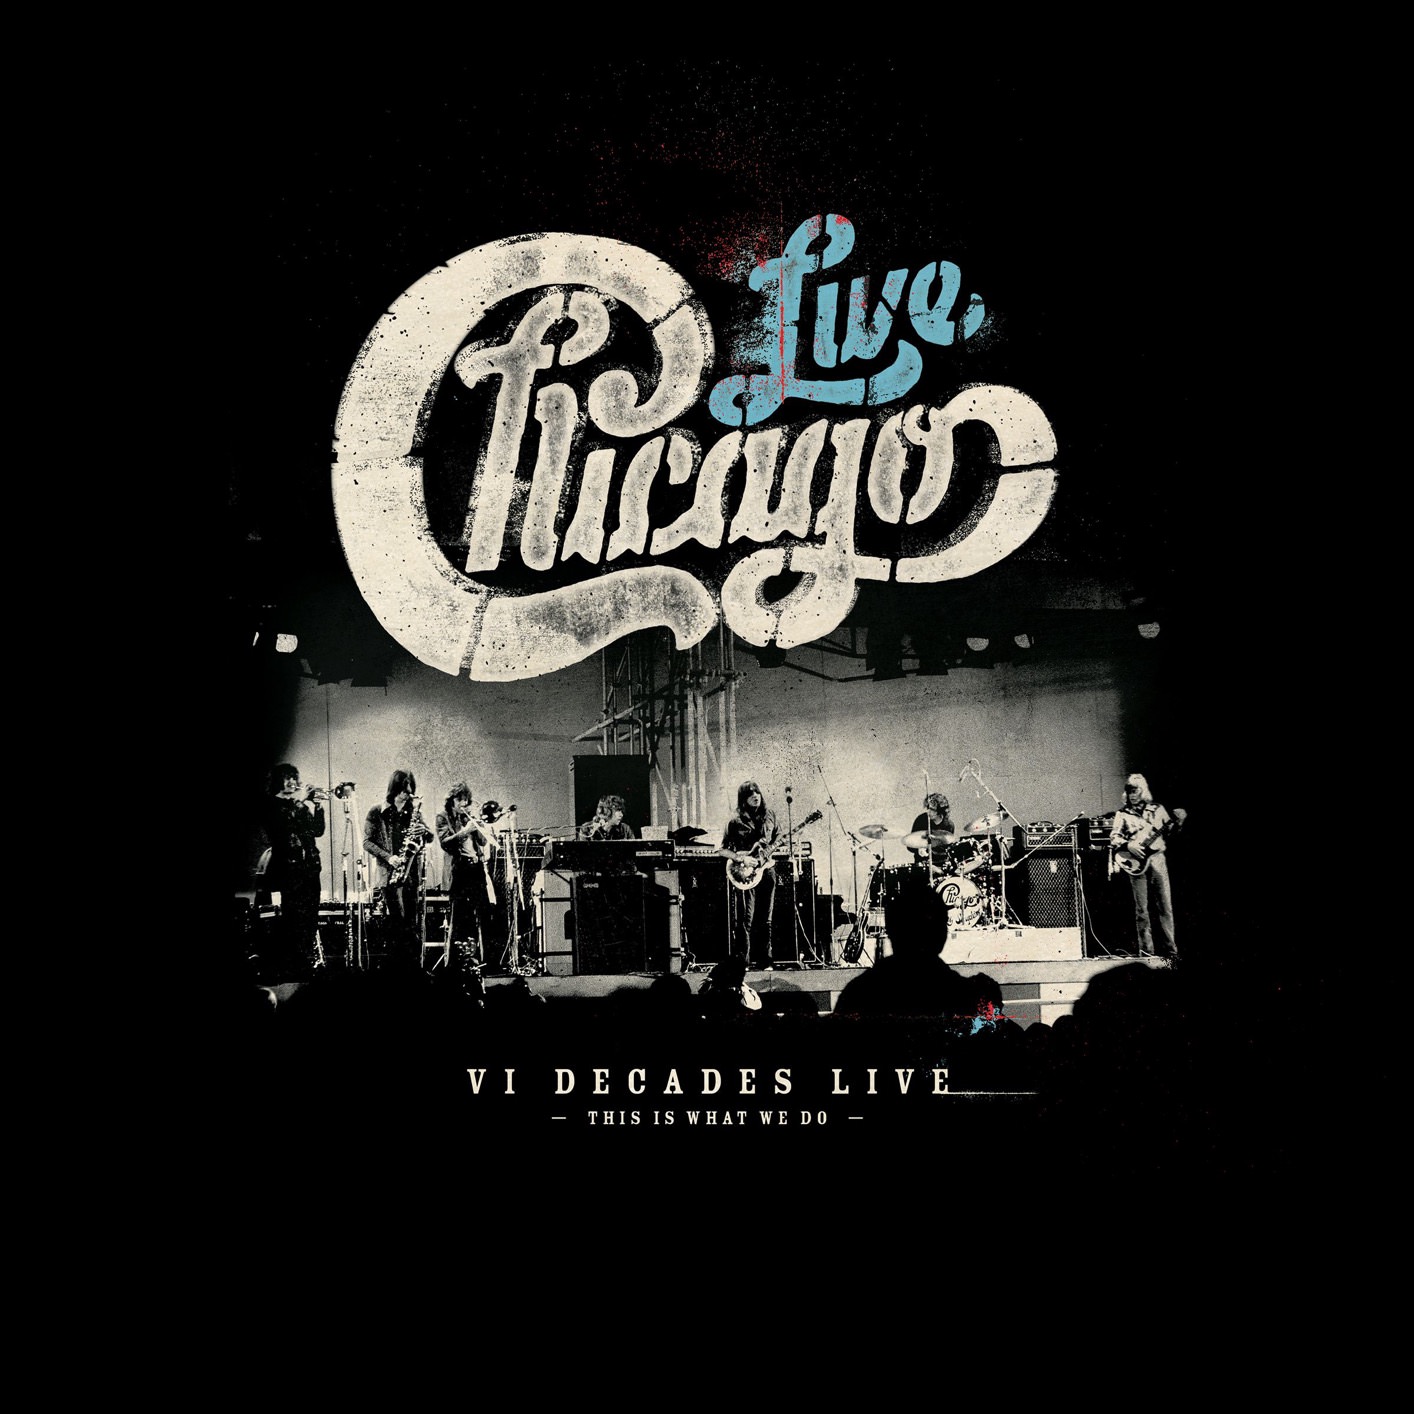 Chicago - Chicago: VI Decades Live (This Is What We Do) (2018) [FLAC 24bit/44,1kHz]